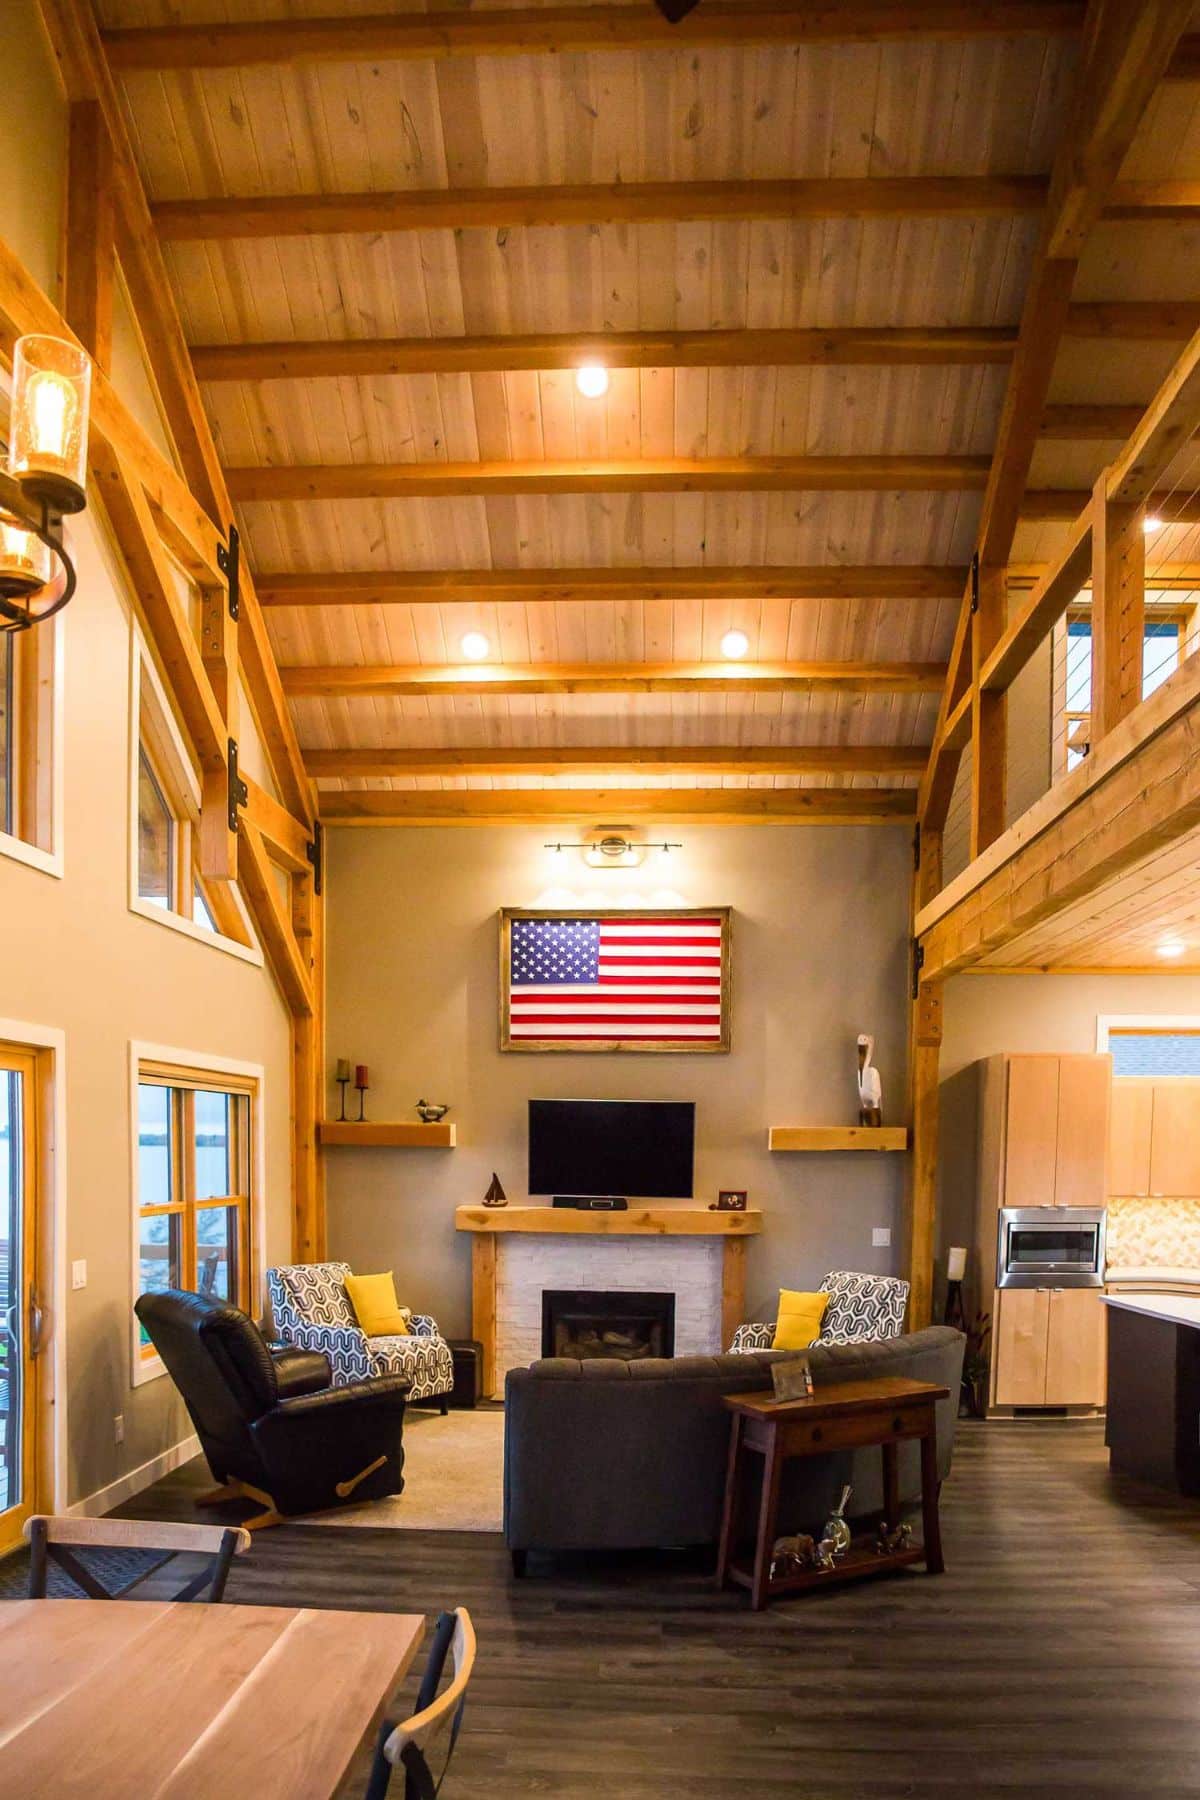 american flag displayed above fireplace in living room